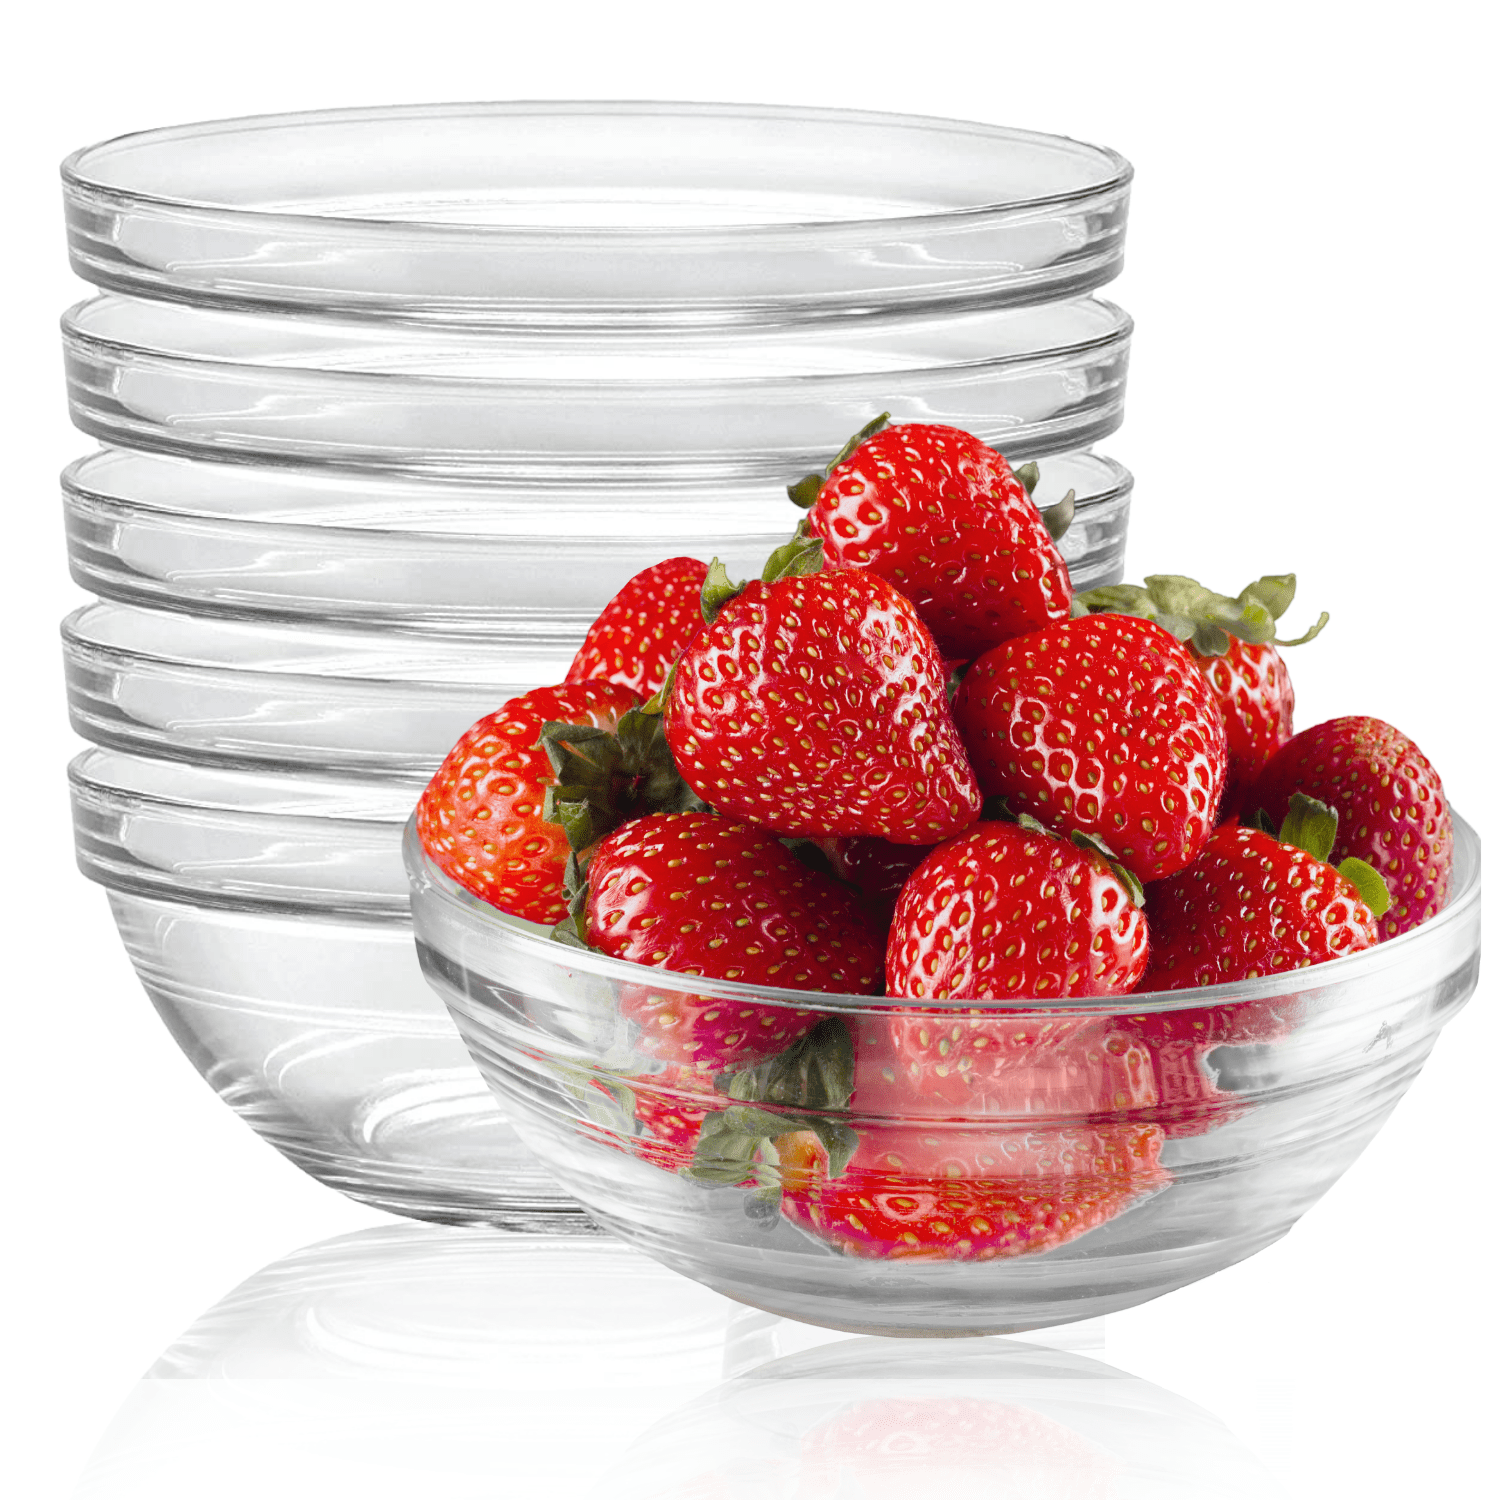 Lartique Mini 3.5 Inch Small Glass Bowls with Lids - Small Bowls Perfect  for Prep, Dips, Nuts, or Candy - Meal Prep Bowls or Dessert Bowls, Set of 12